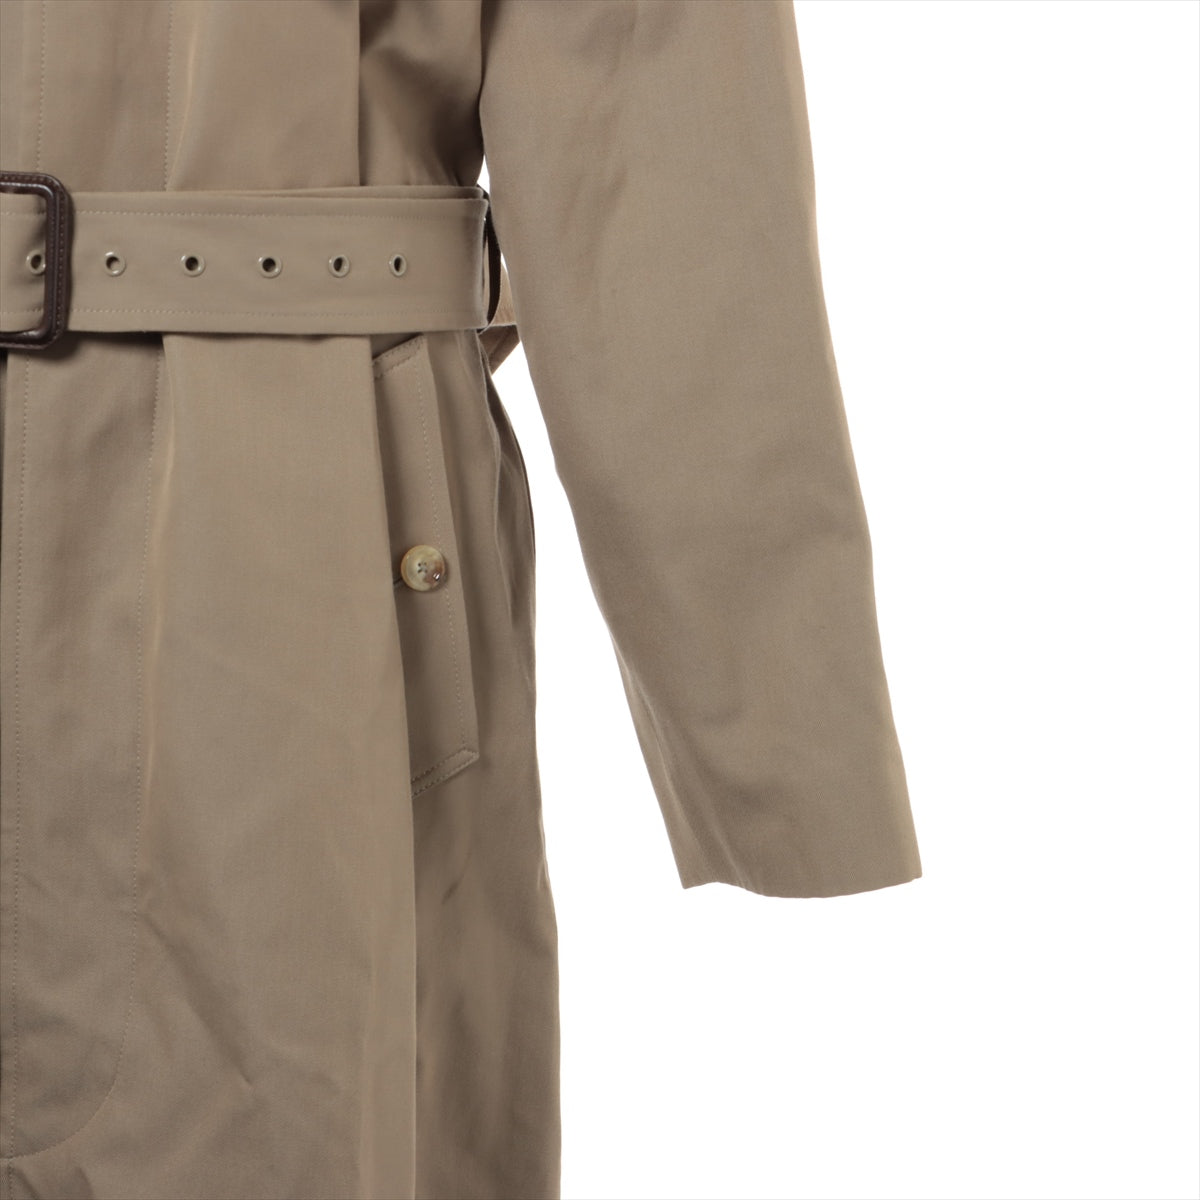 Celine Hedi Period Cotton & Wool Trench Coat 42 Ladies' Beige  2M332984C Oversized belted